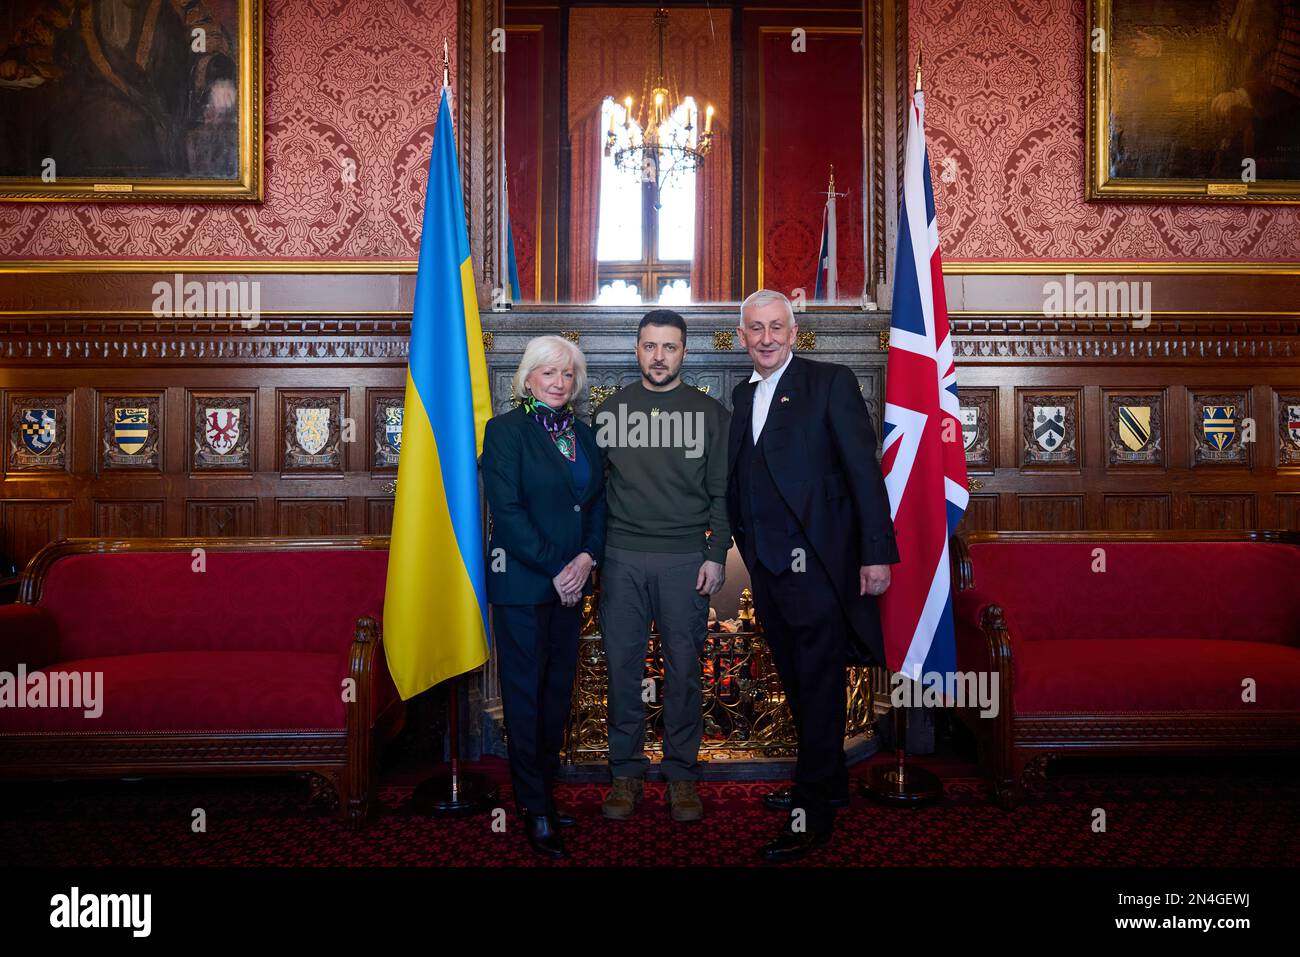 Combat aircraft – for Ukraine, wings – for freedom – address by President Volodymyr Zelensky to both Houses of Parliament of the United Kingdom. The Ukraine President visited the United Kingdom on February 8, 2023 and attempting to win British support for the supply of British NATO standard fighter aircraft. Stock Photo